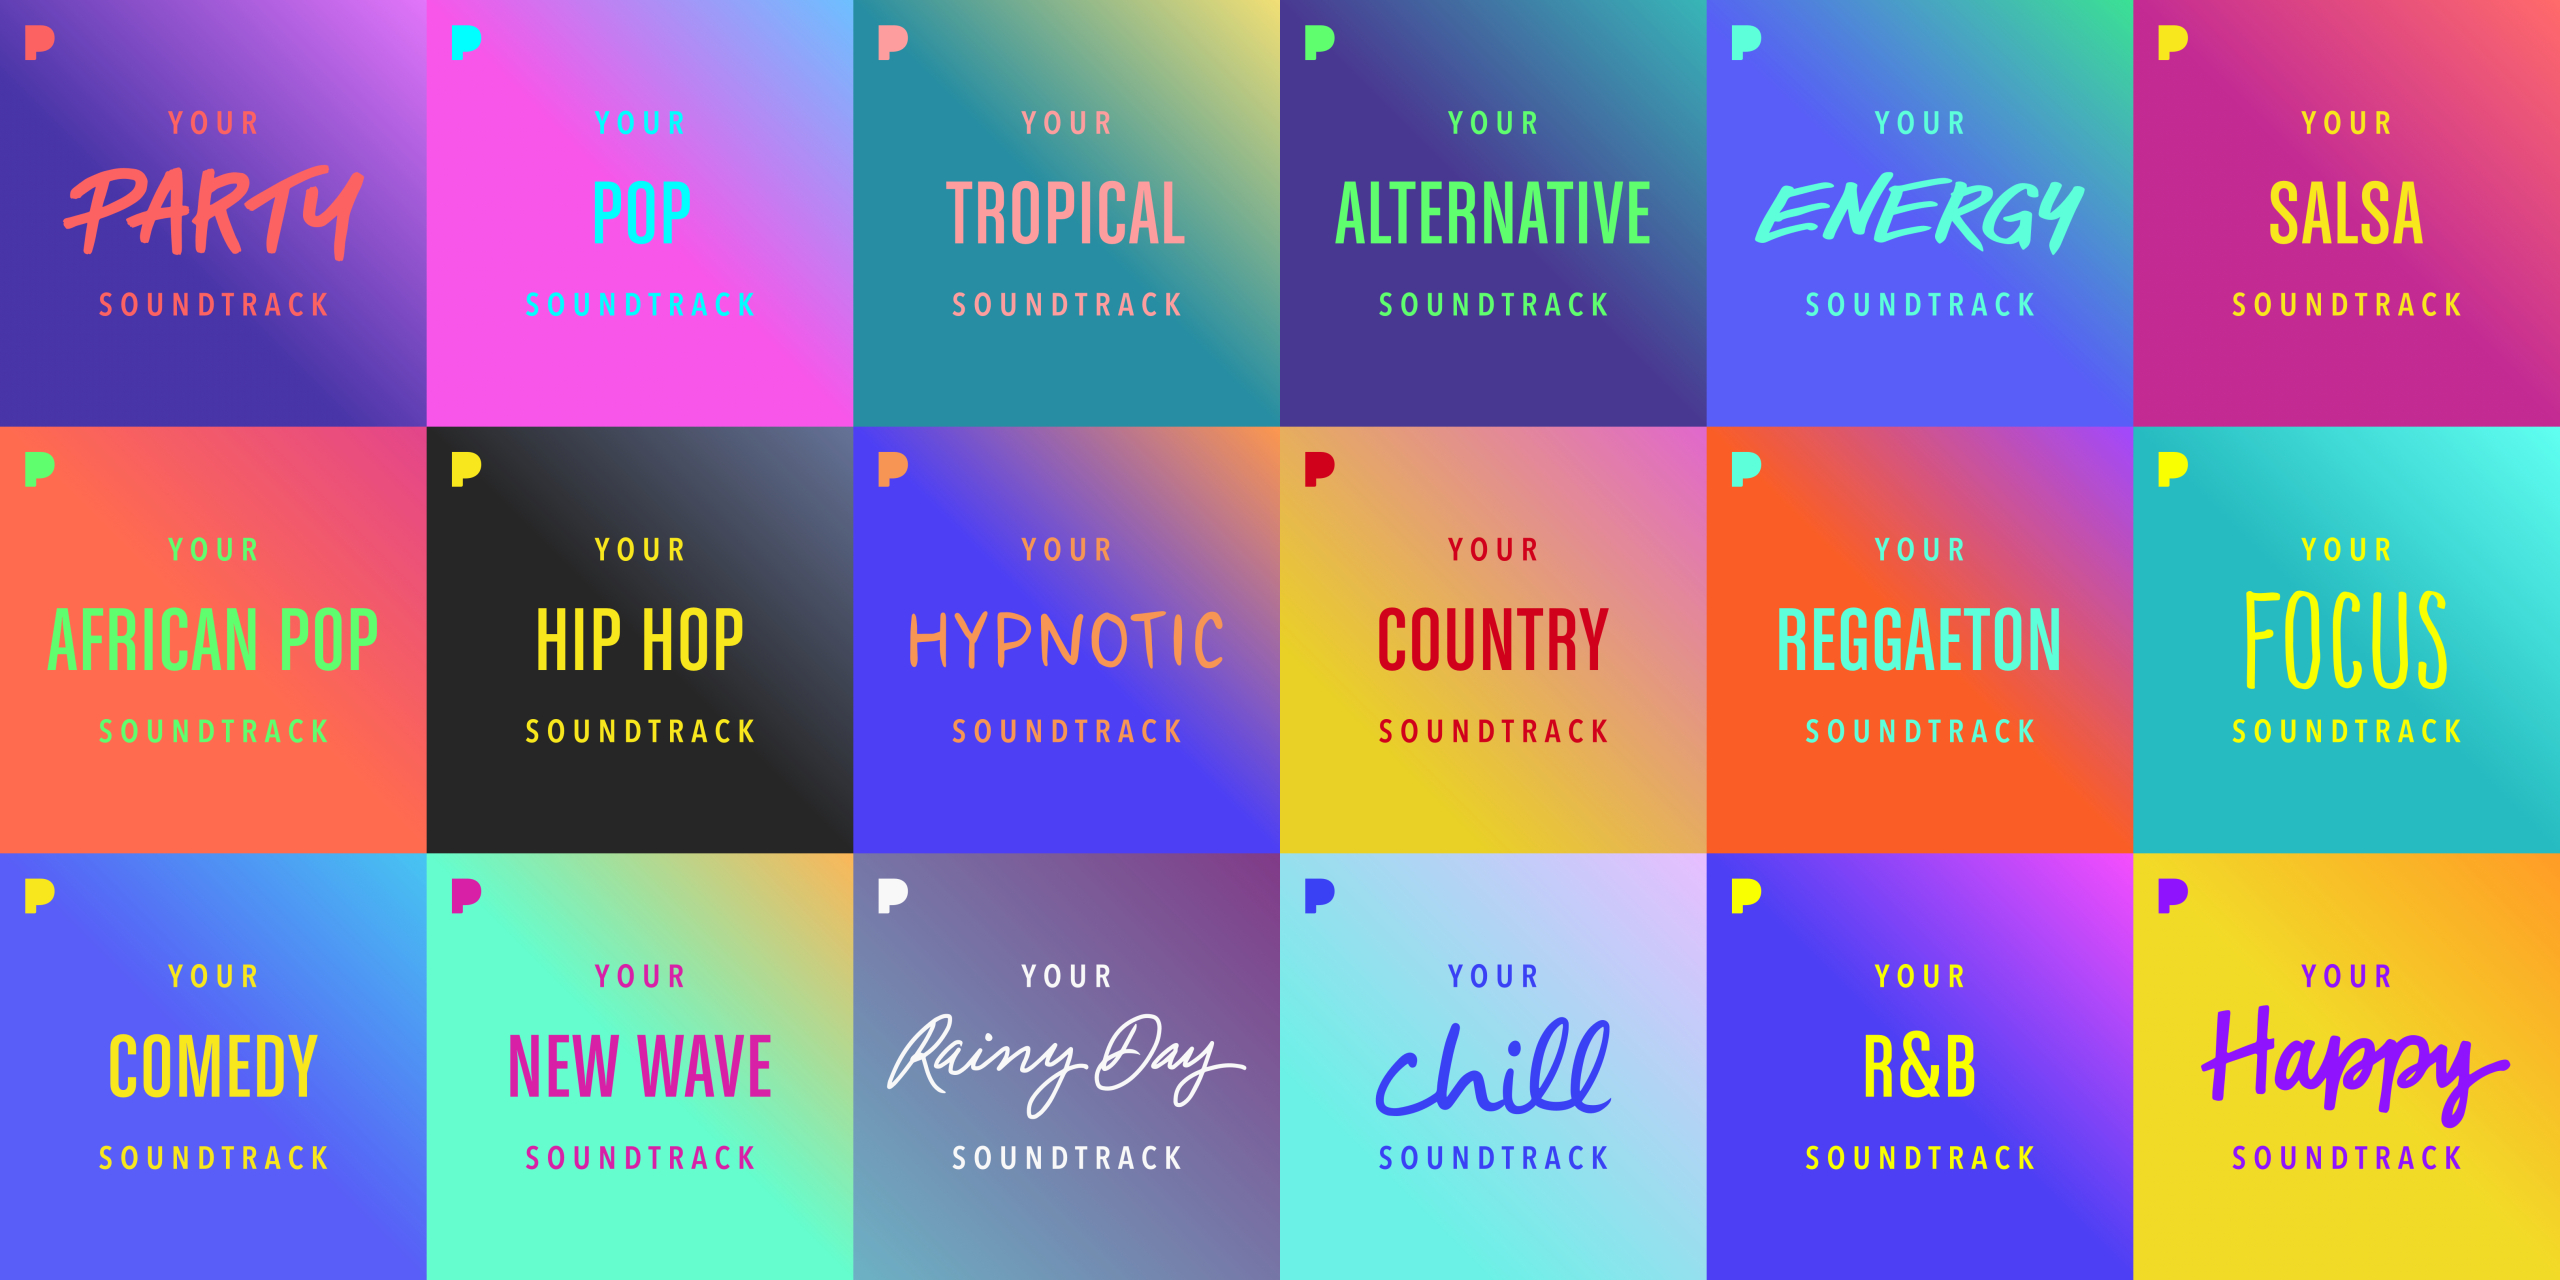 Find your new favourite songs with Pandora’s personalised playlists